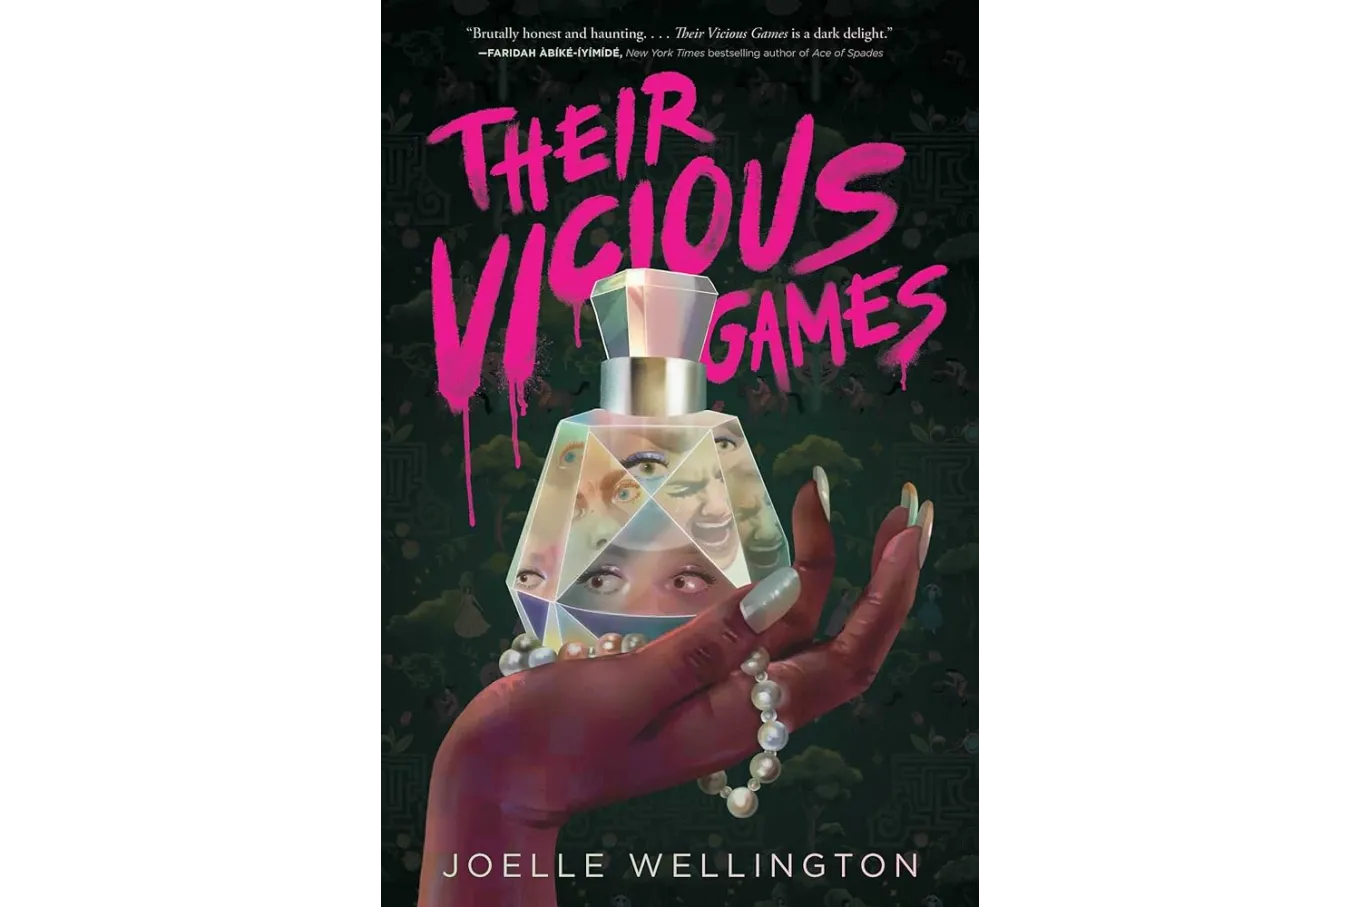 Cover of Their Vicious Games